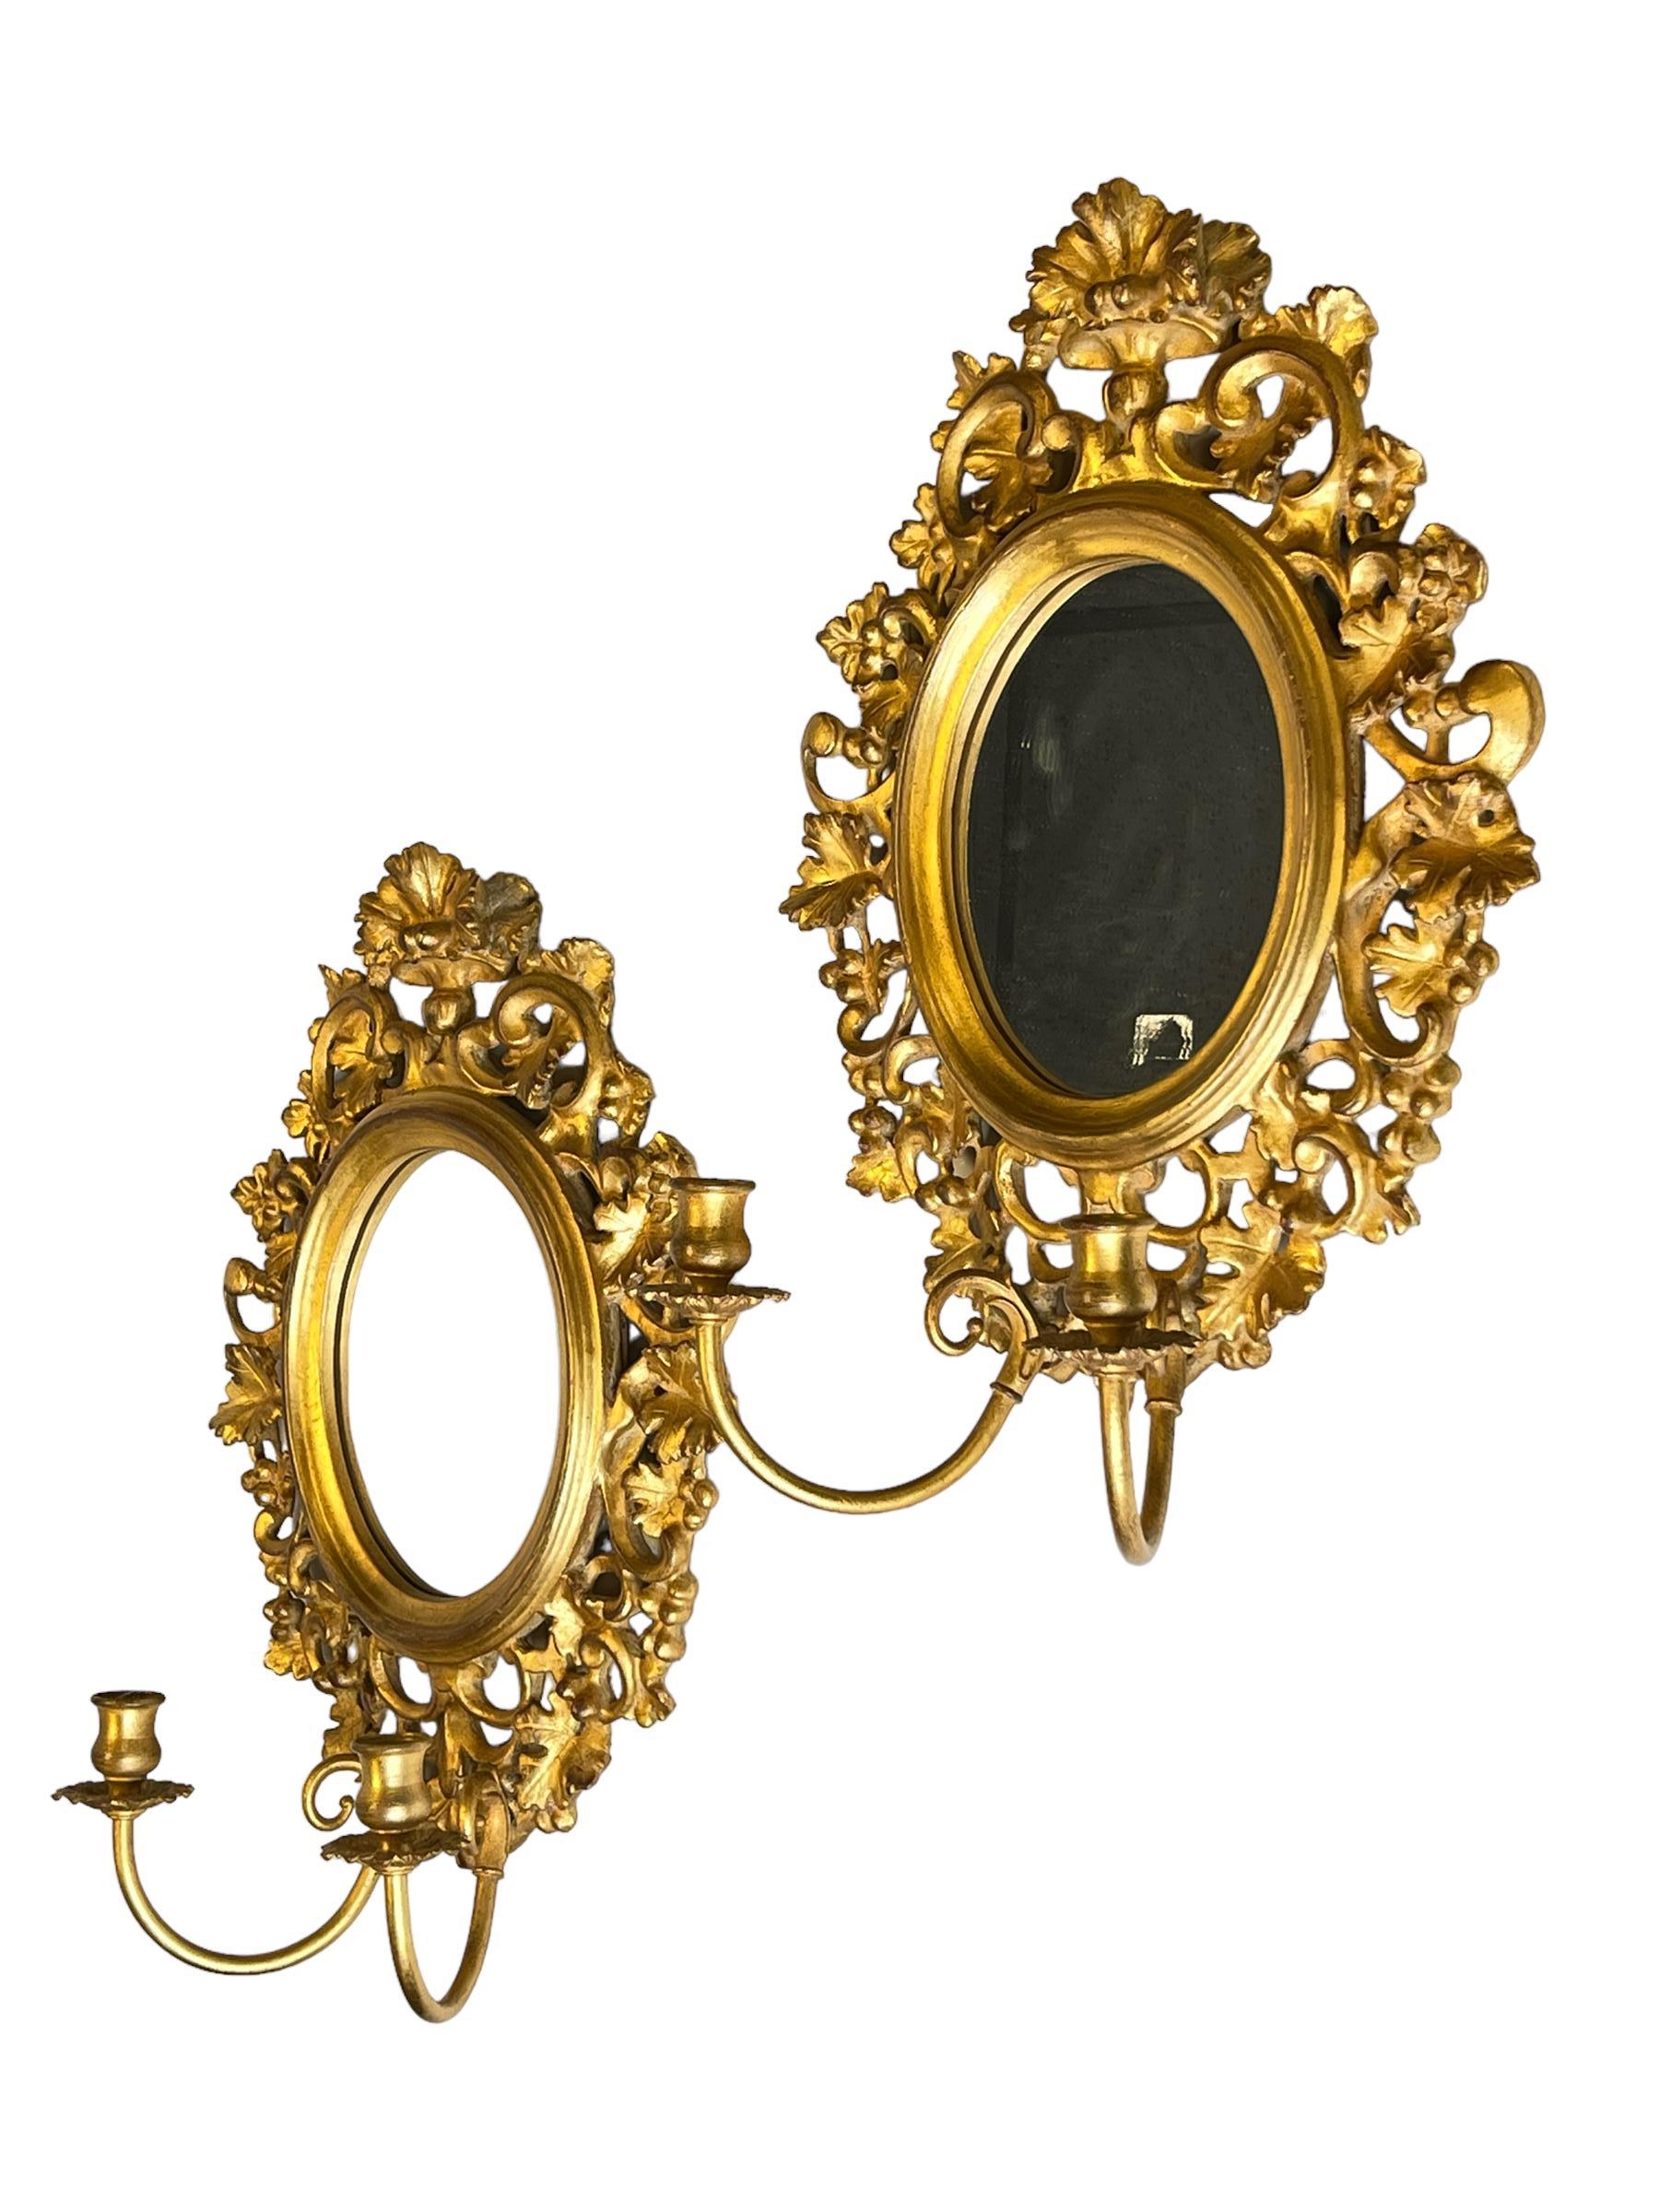 Pair vintage Italian neoclassical giltwood and gilt metal girandole wall lights with oval mirrors and two lights.  